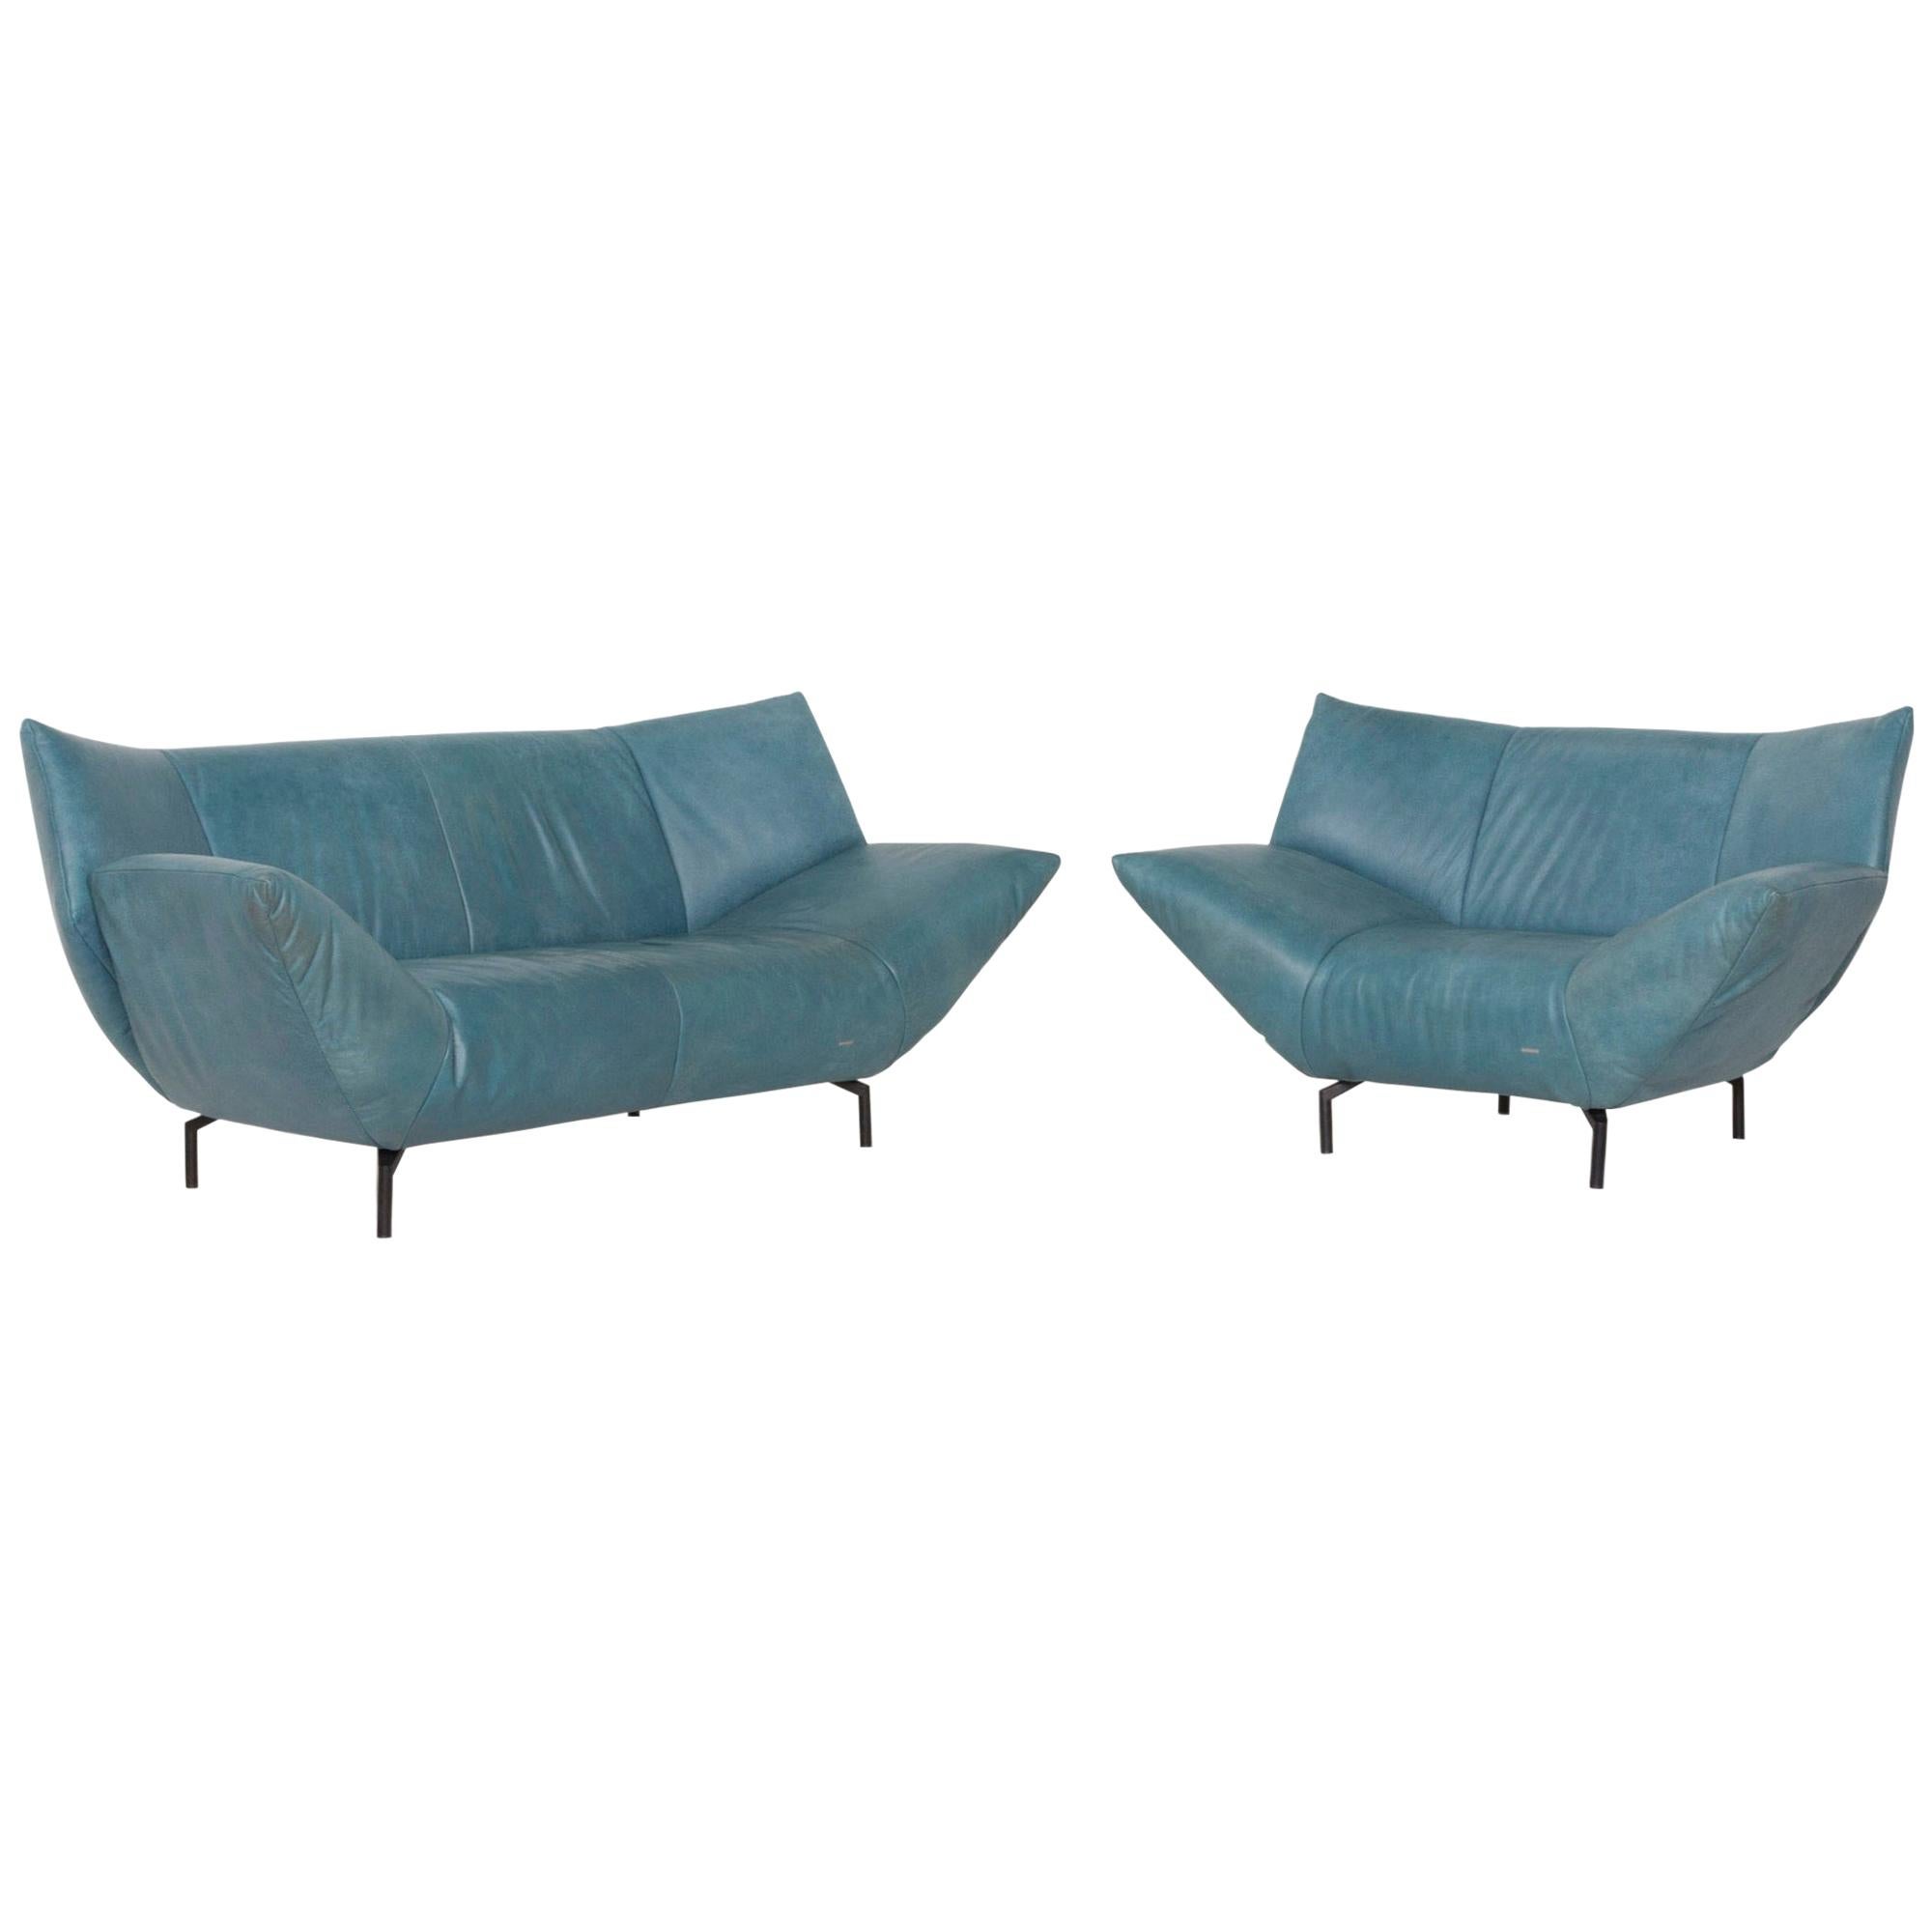 Koinor Leather Sofa Set Turquoise Blue Green 1 Two-Seat 1 Armchair